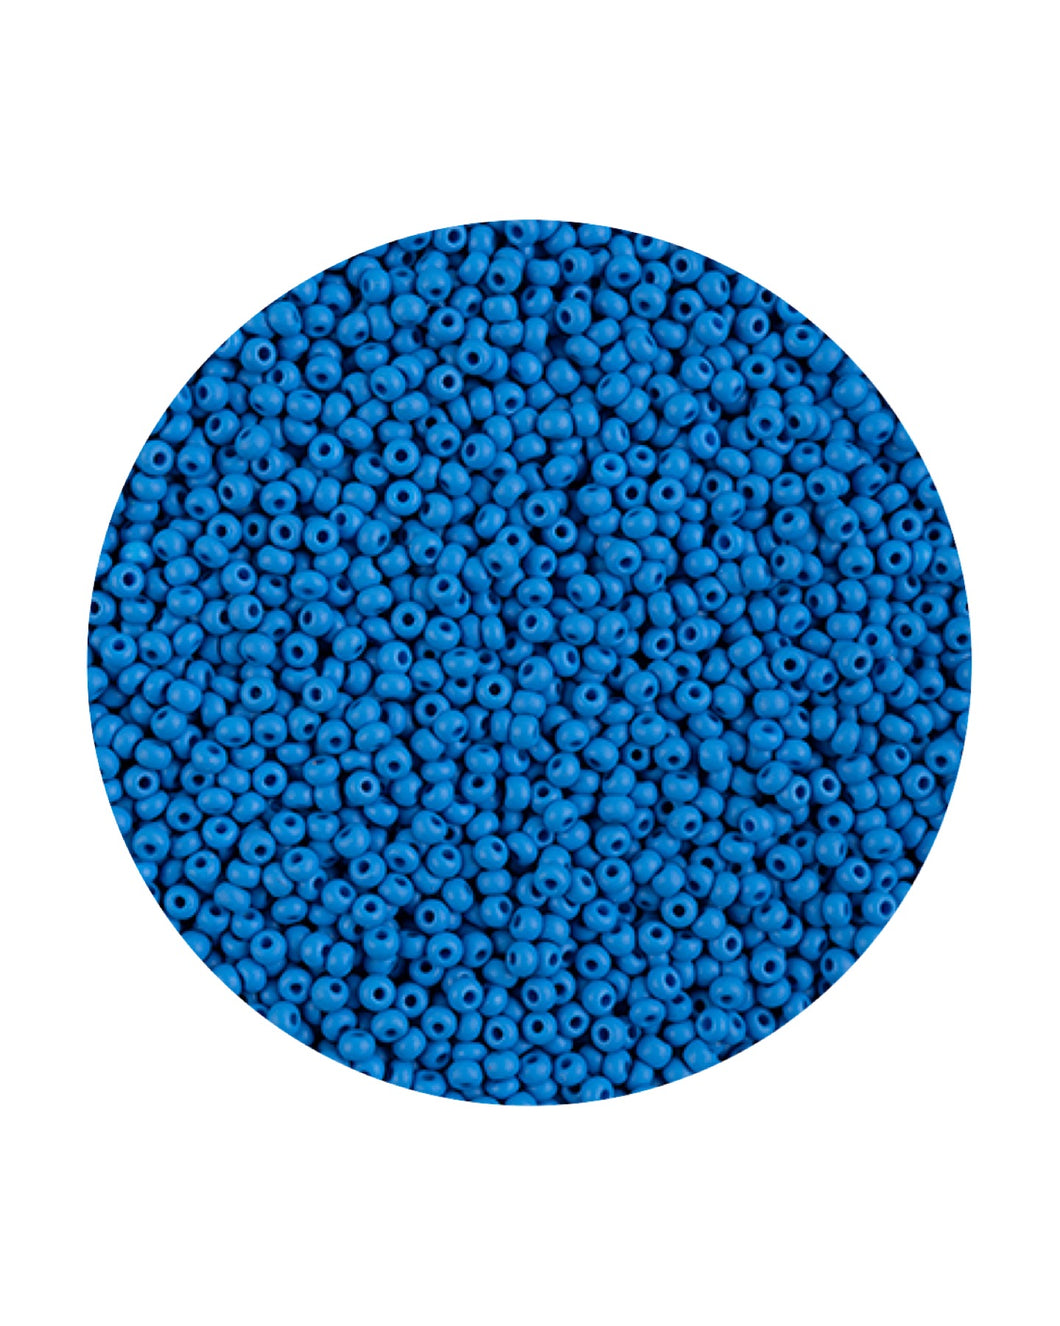 11/0 Preciosa Permalux Seed Beads Dyed Chalk Blue Matte, 23g Bags